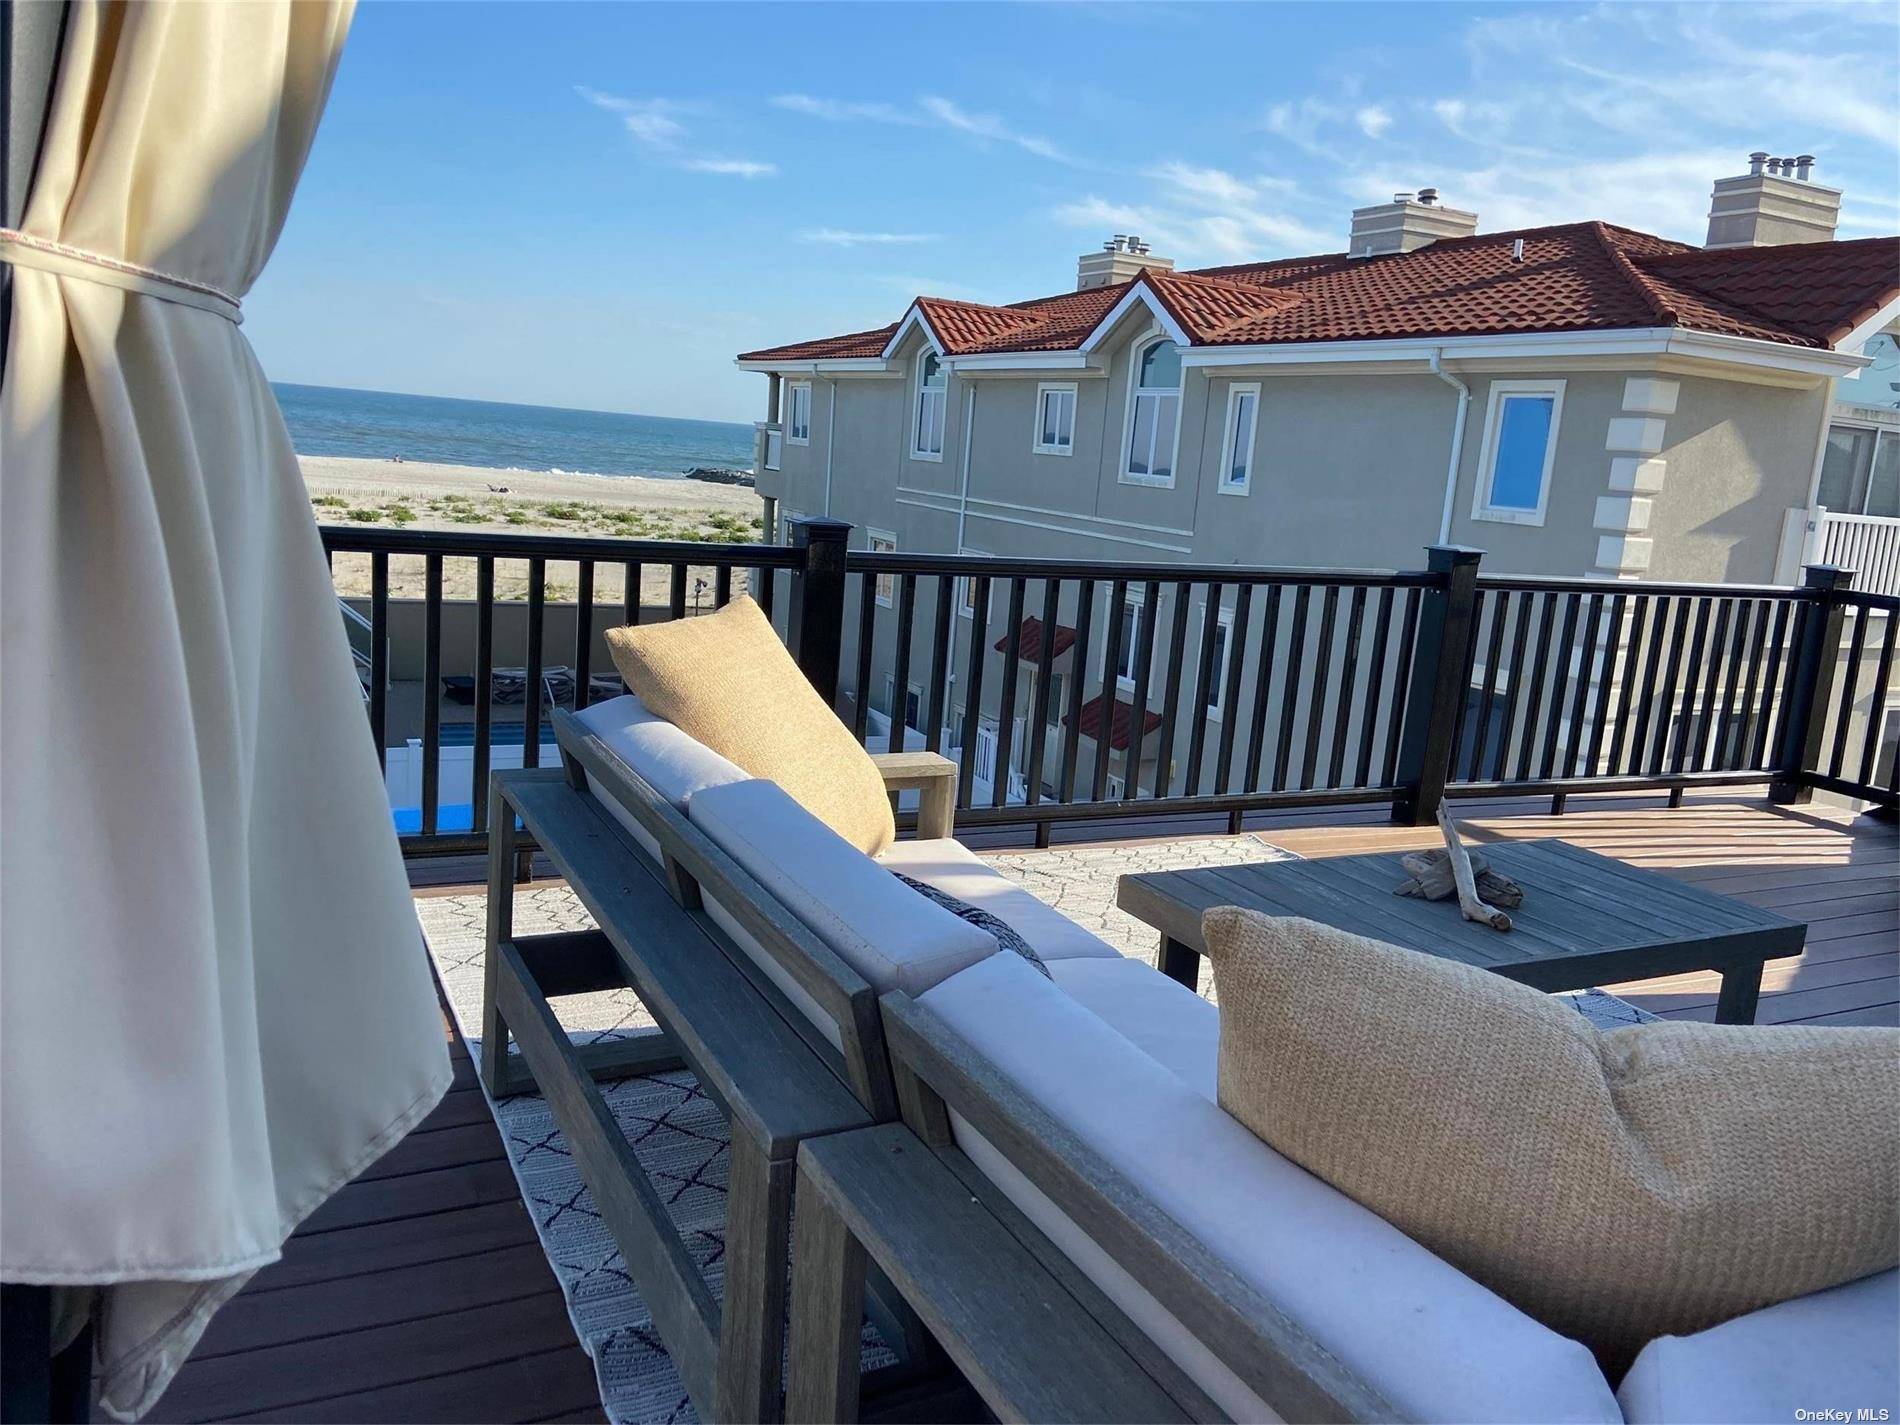 Gorgeous updated yearly rental in the heart of the West End Upper Apartment, 3 bedrooms, 2 full baths, washer dryer in unit, ocean view deck Parking for two cars, garage ...